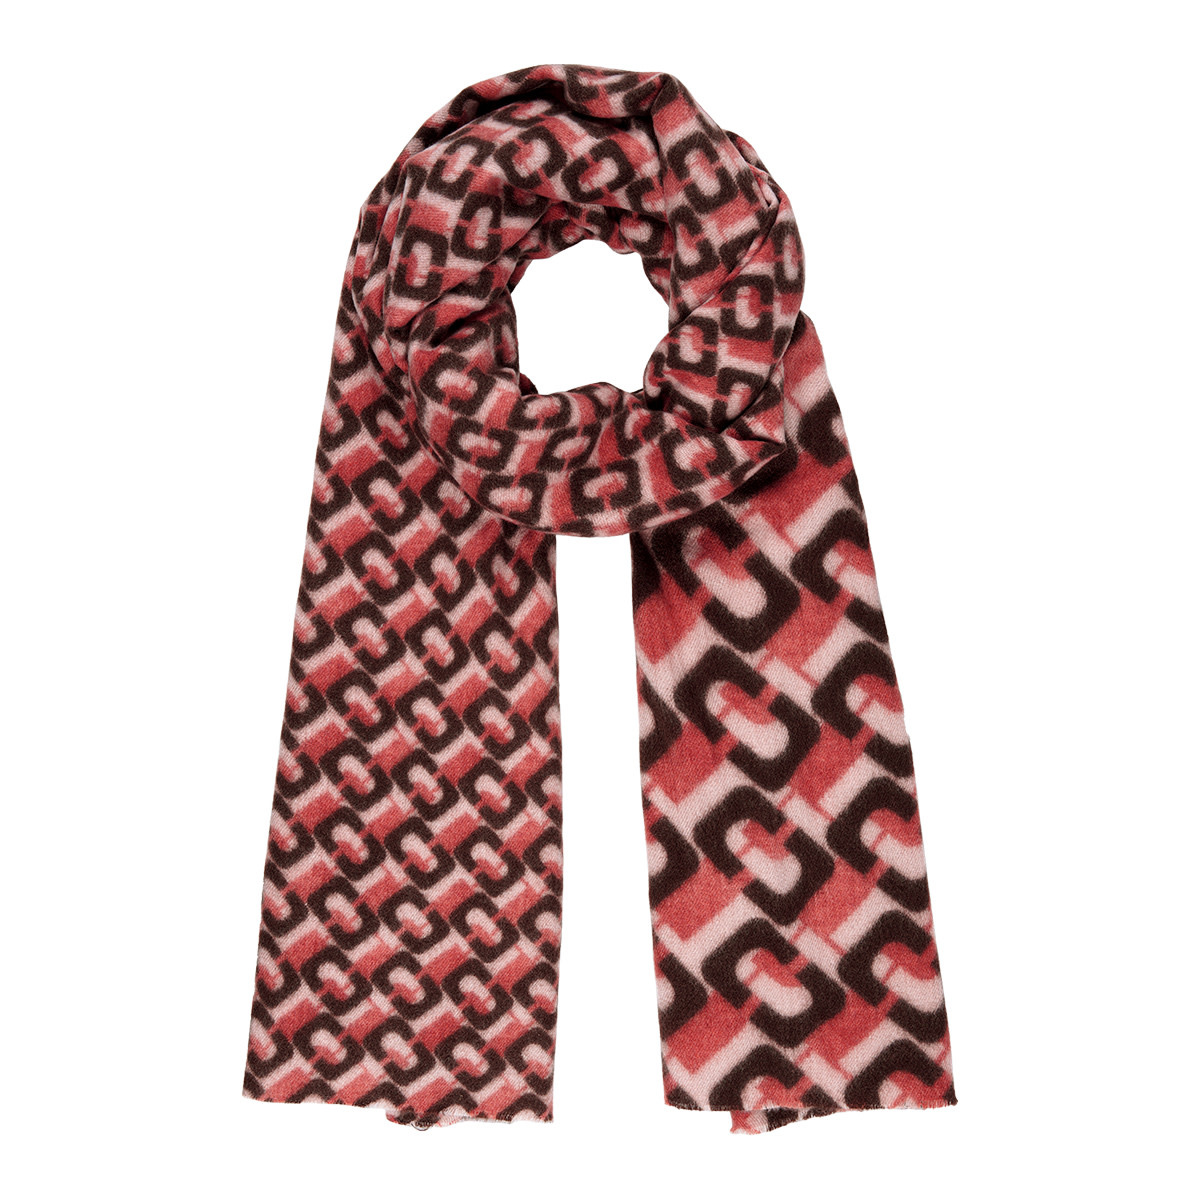 With love Scarf chain print red